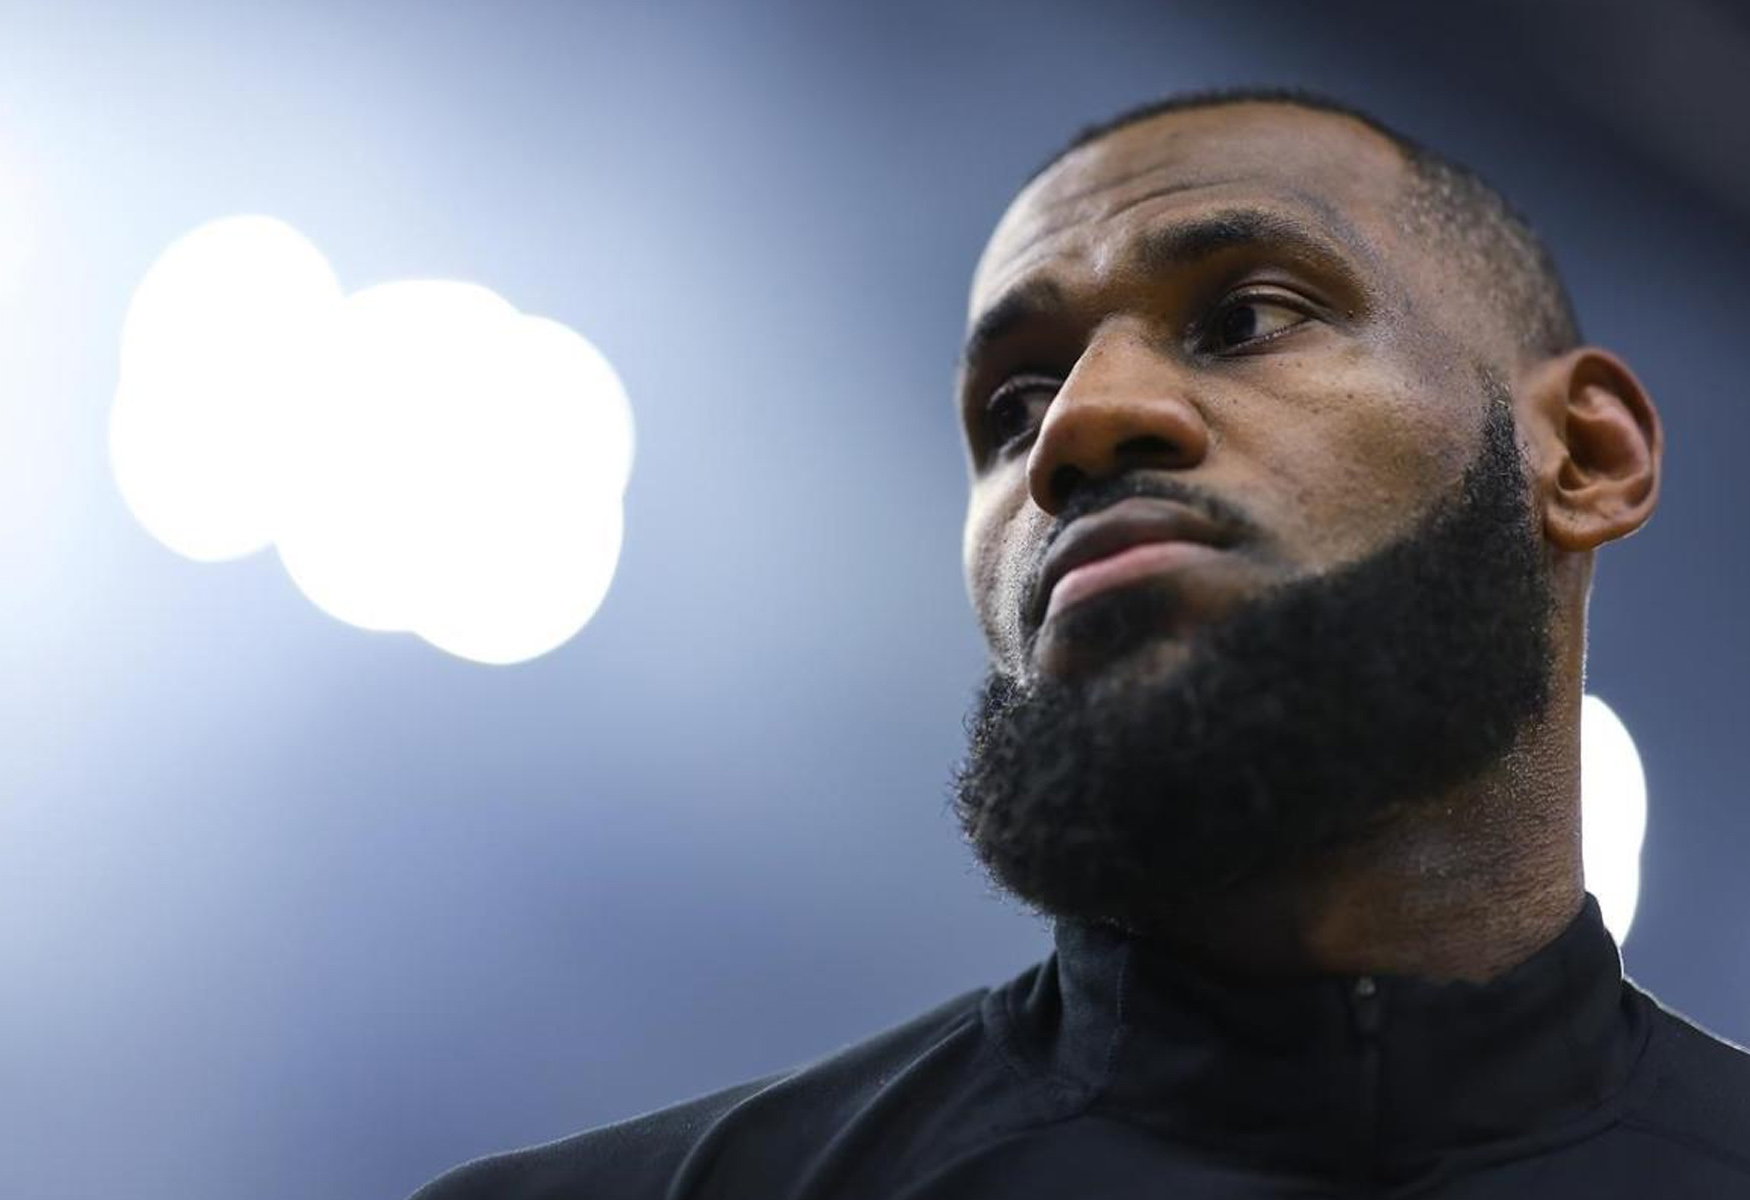 LeBron James Controversy: Frustration Over Missed 3-Point Call On His Birthday